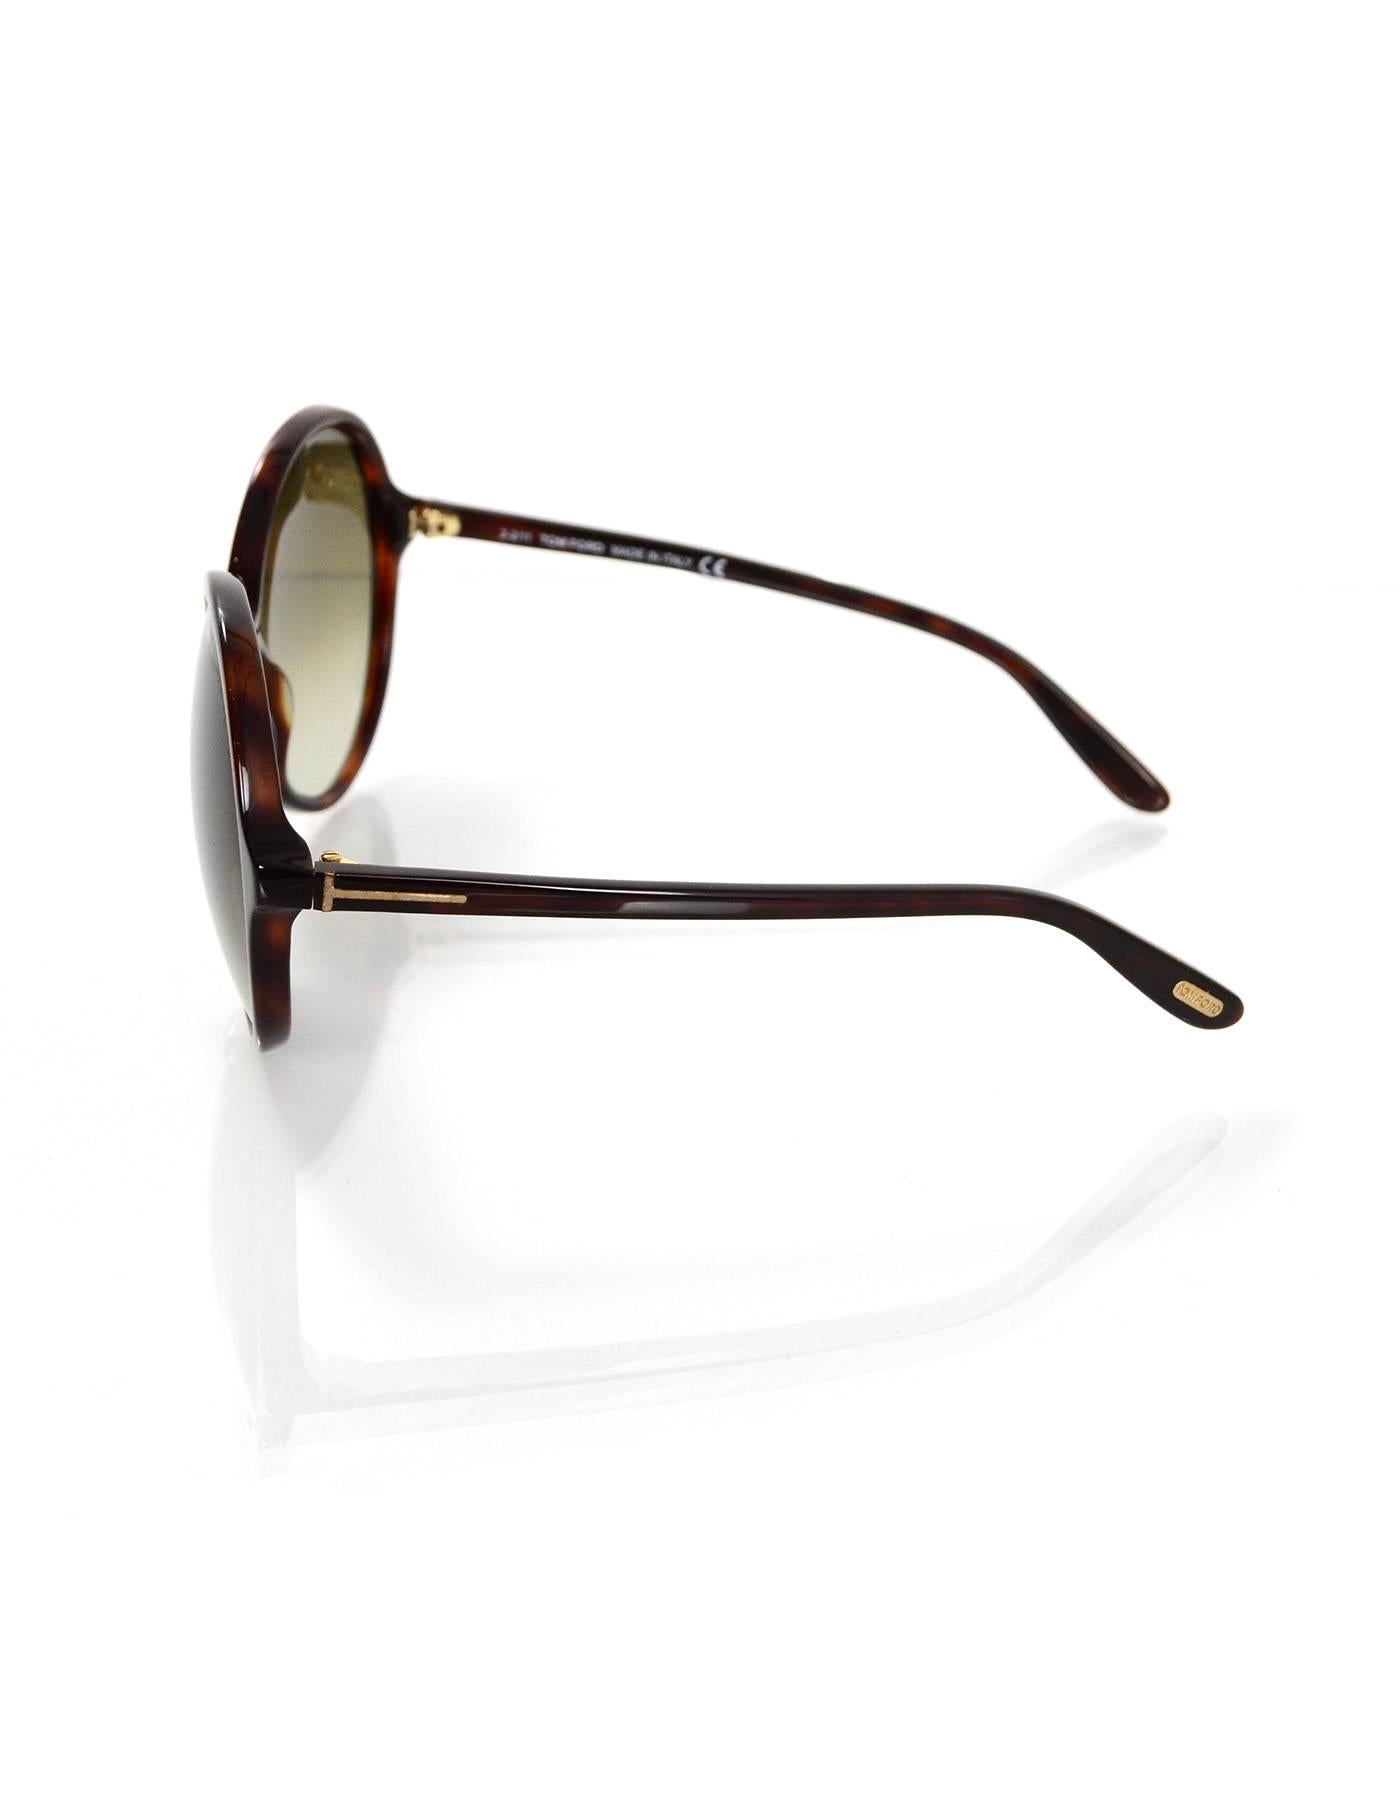 Tom Ford Tortoise Rhonda Sunglasses

Made In: Italy
Color: Brown/tortoise
Materials: Resin
Retail Price: $395 + tax
Overall Condition: Excellent pre-owned condition
Includes: Tom Ford case, original sales receipt

Measurements: 
Across: